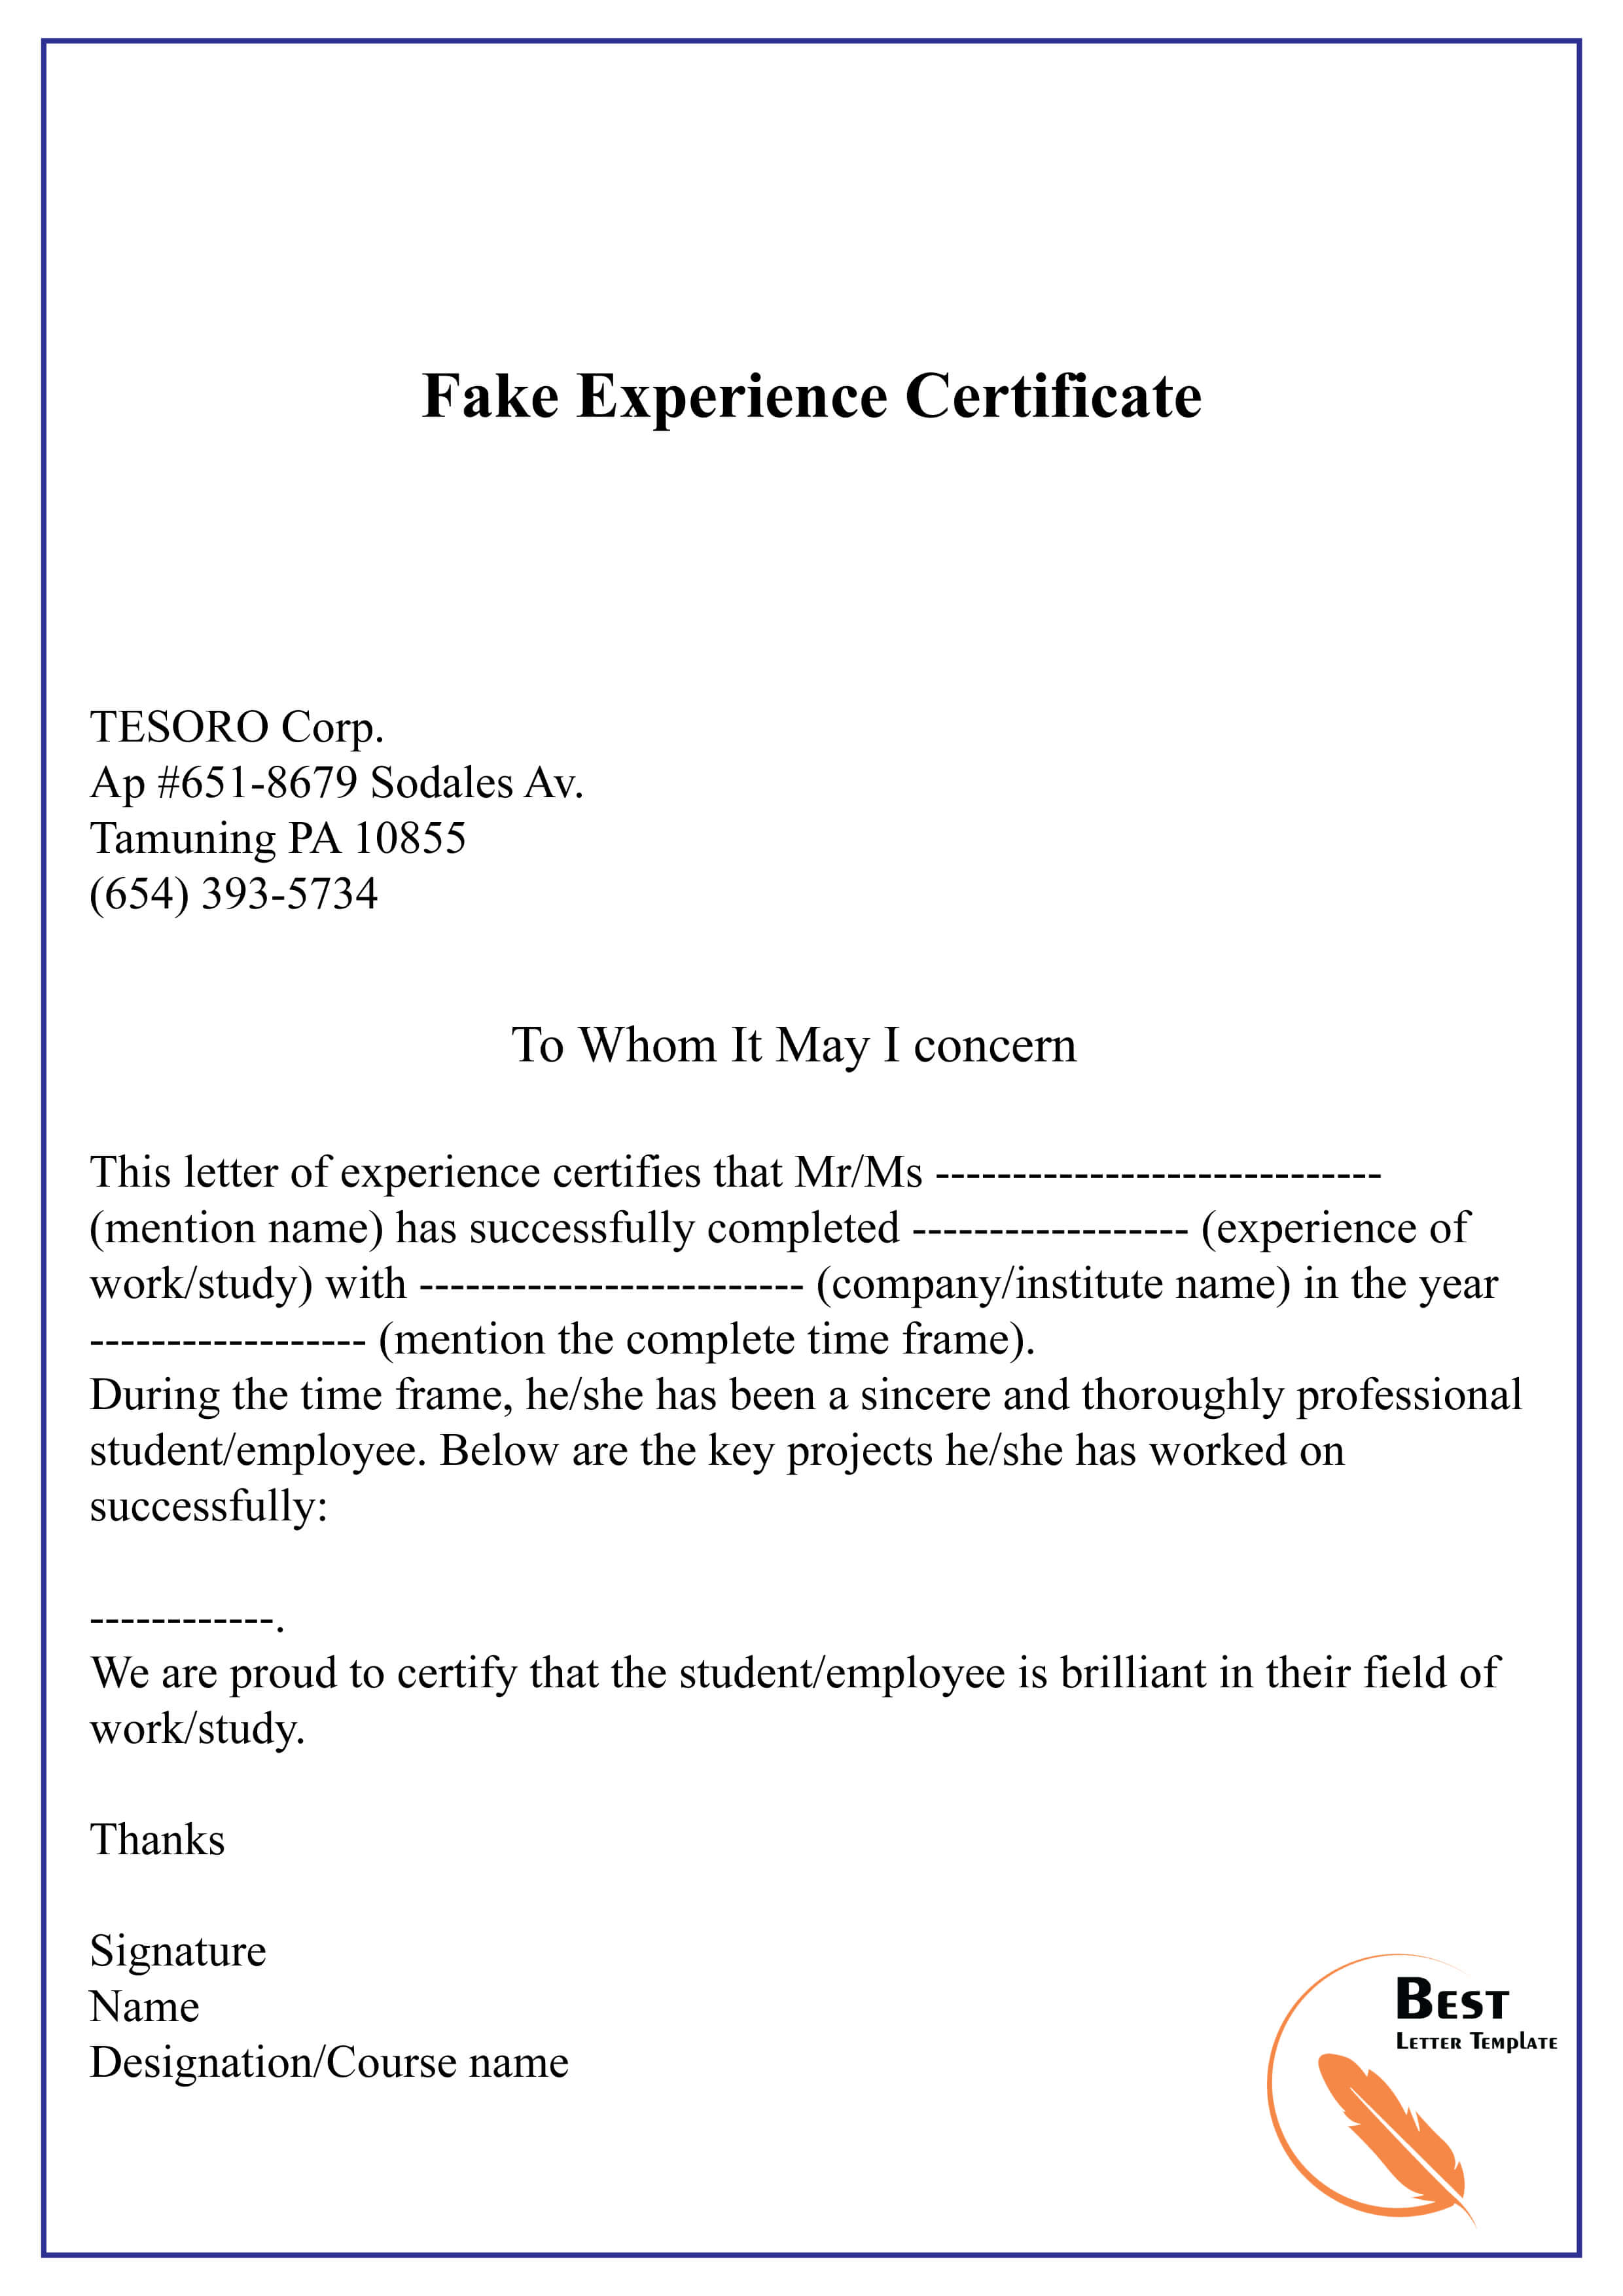 Fake Experience Certificate 01 | Best Letter Template Regarding Certificate Of Experience Template